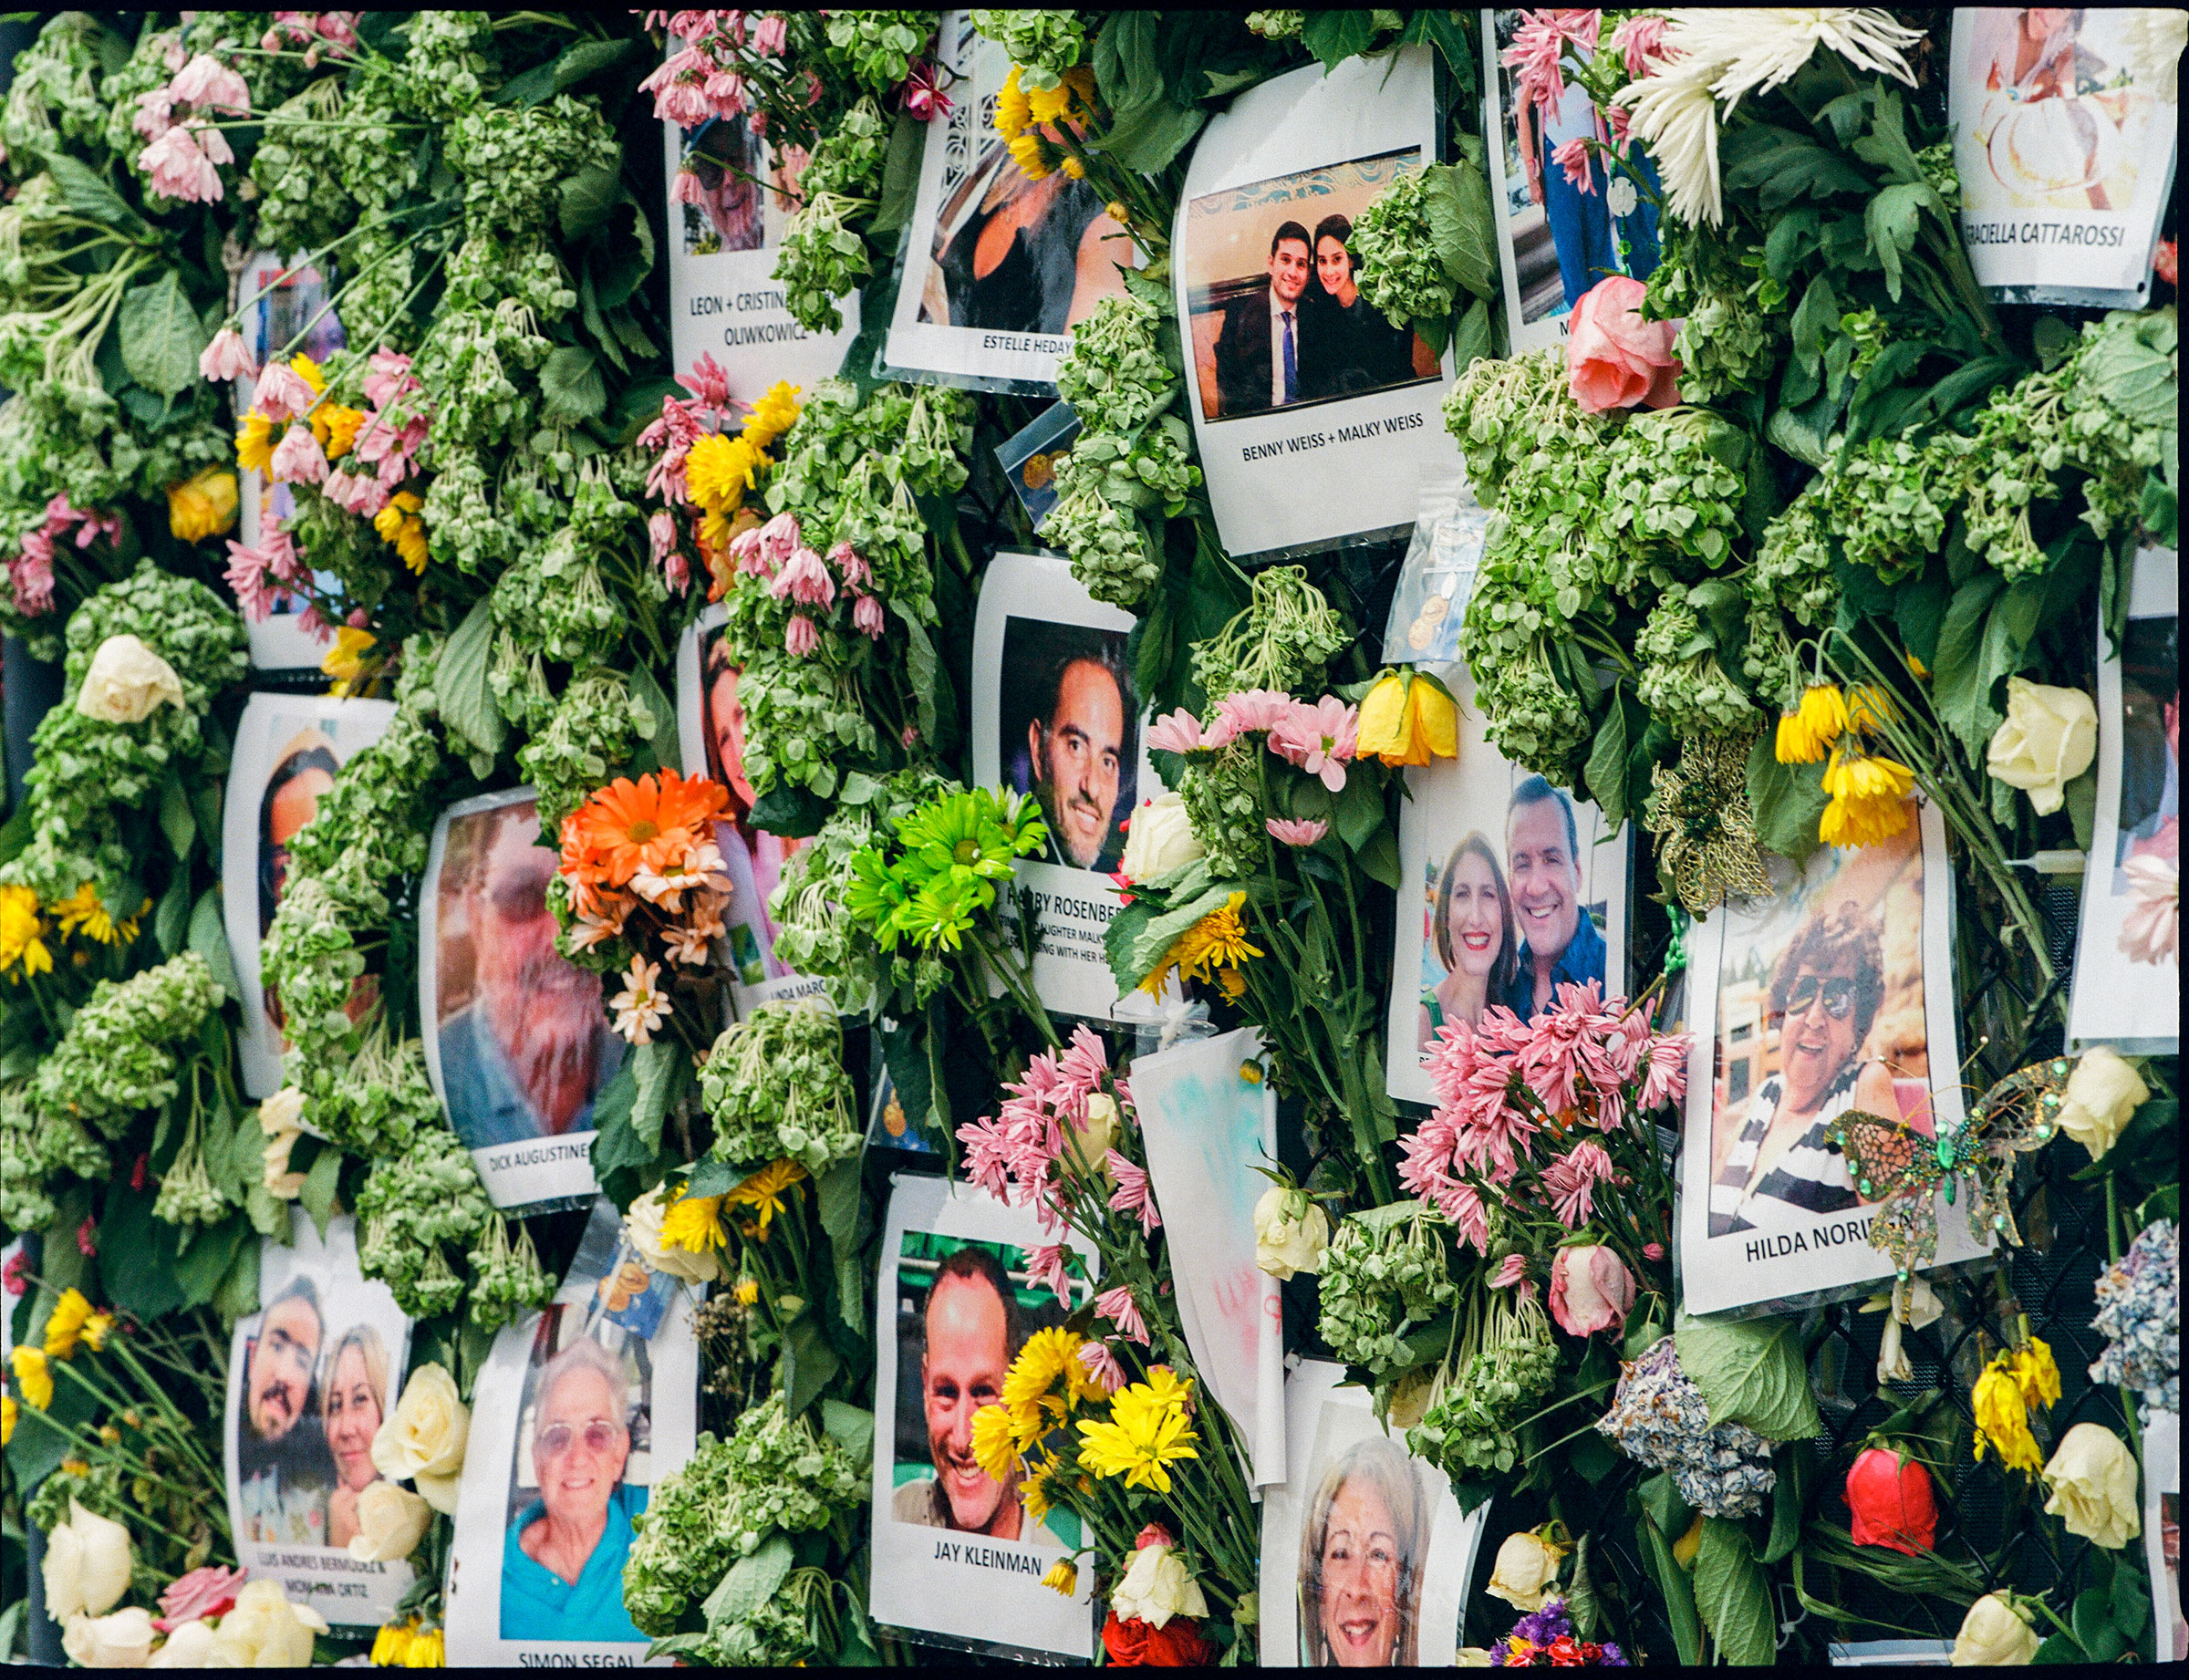 A memorial wall, set up on a nearby tennis court fence, full of posters of missing victims on June 30. (Ysa Pérez for TIME)